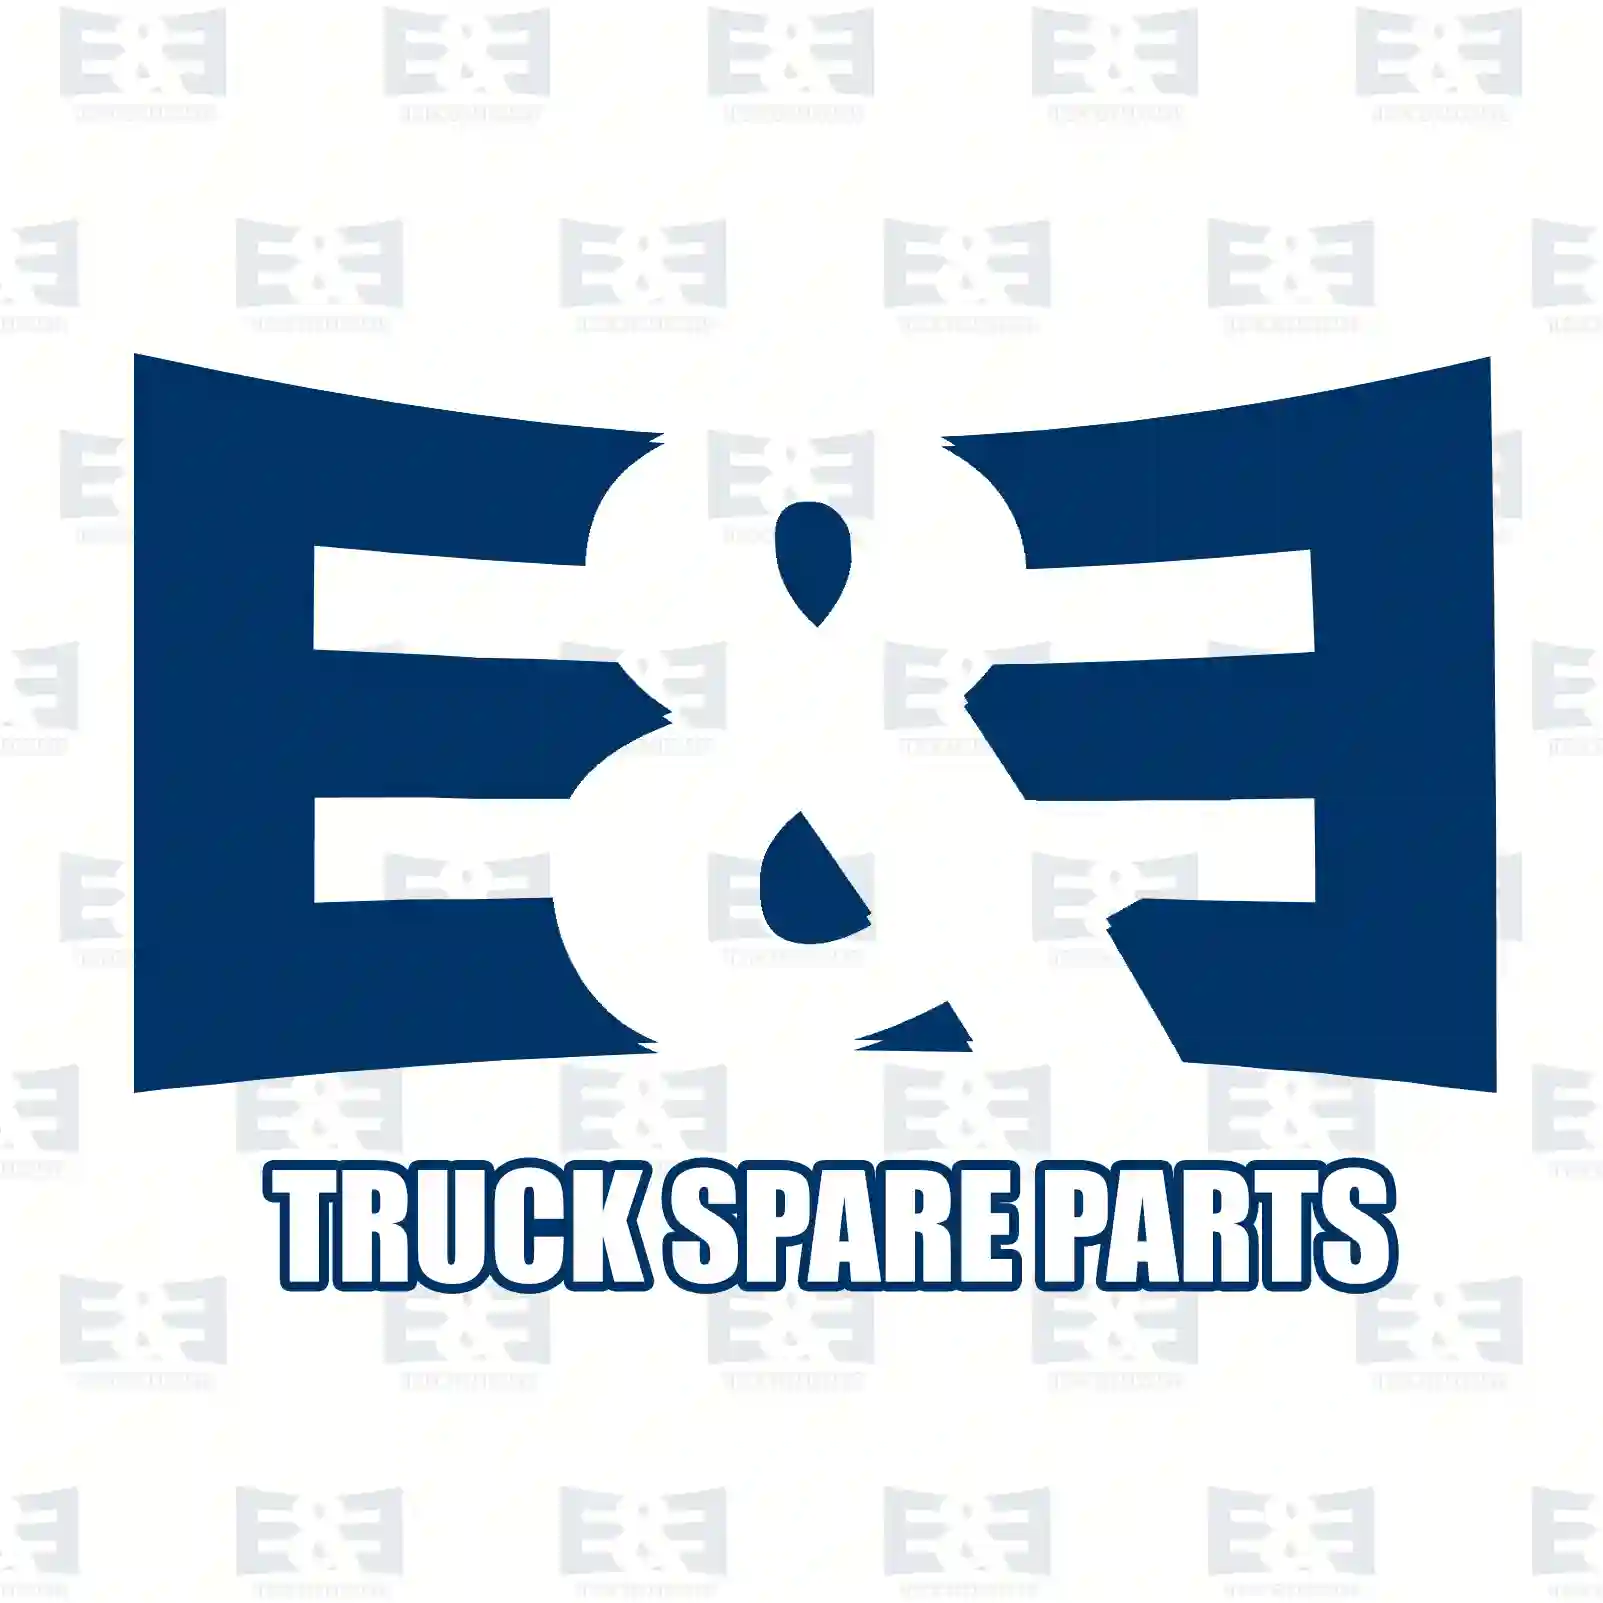  Gear, 3rd and 4th gear || E&E Truck Spare Parts | Truck Spare Parts, Auotomotive Spare Parts